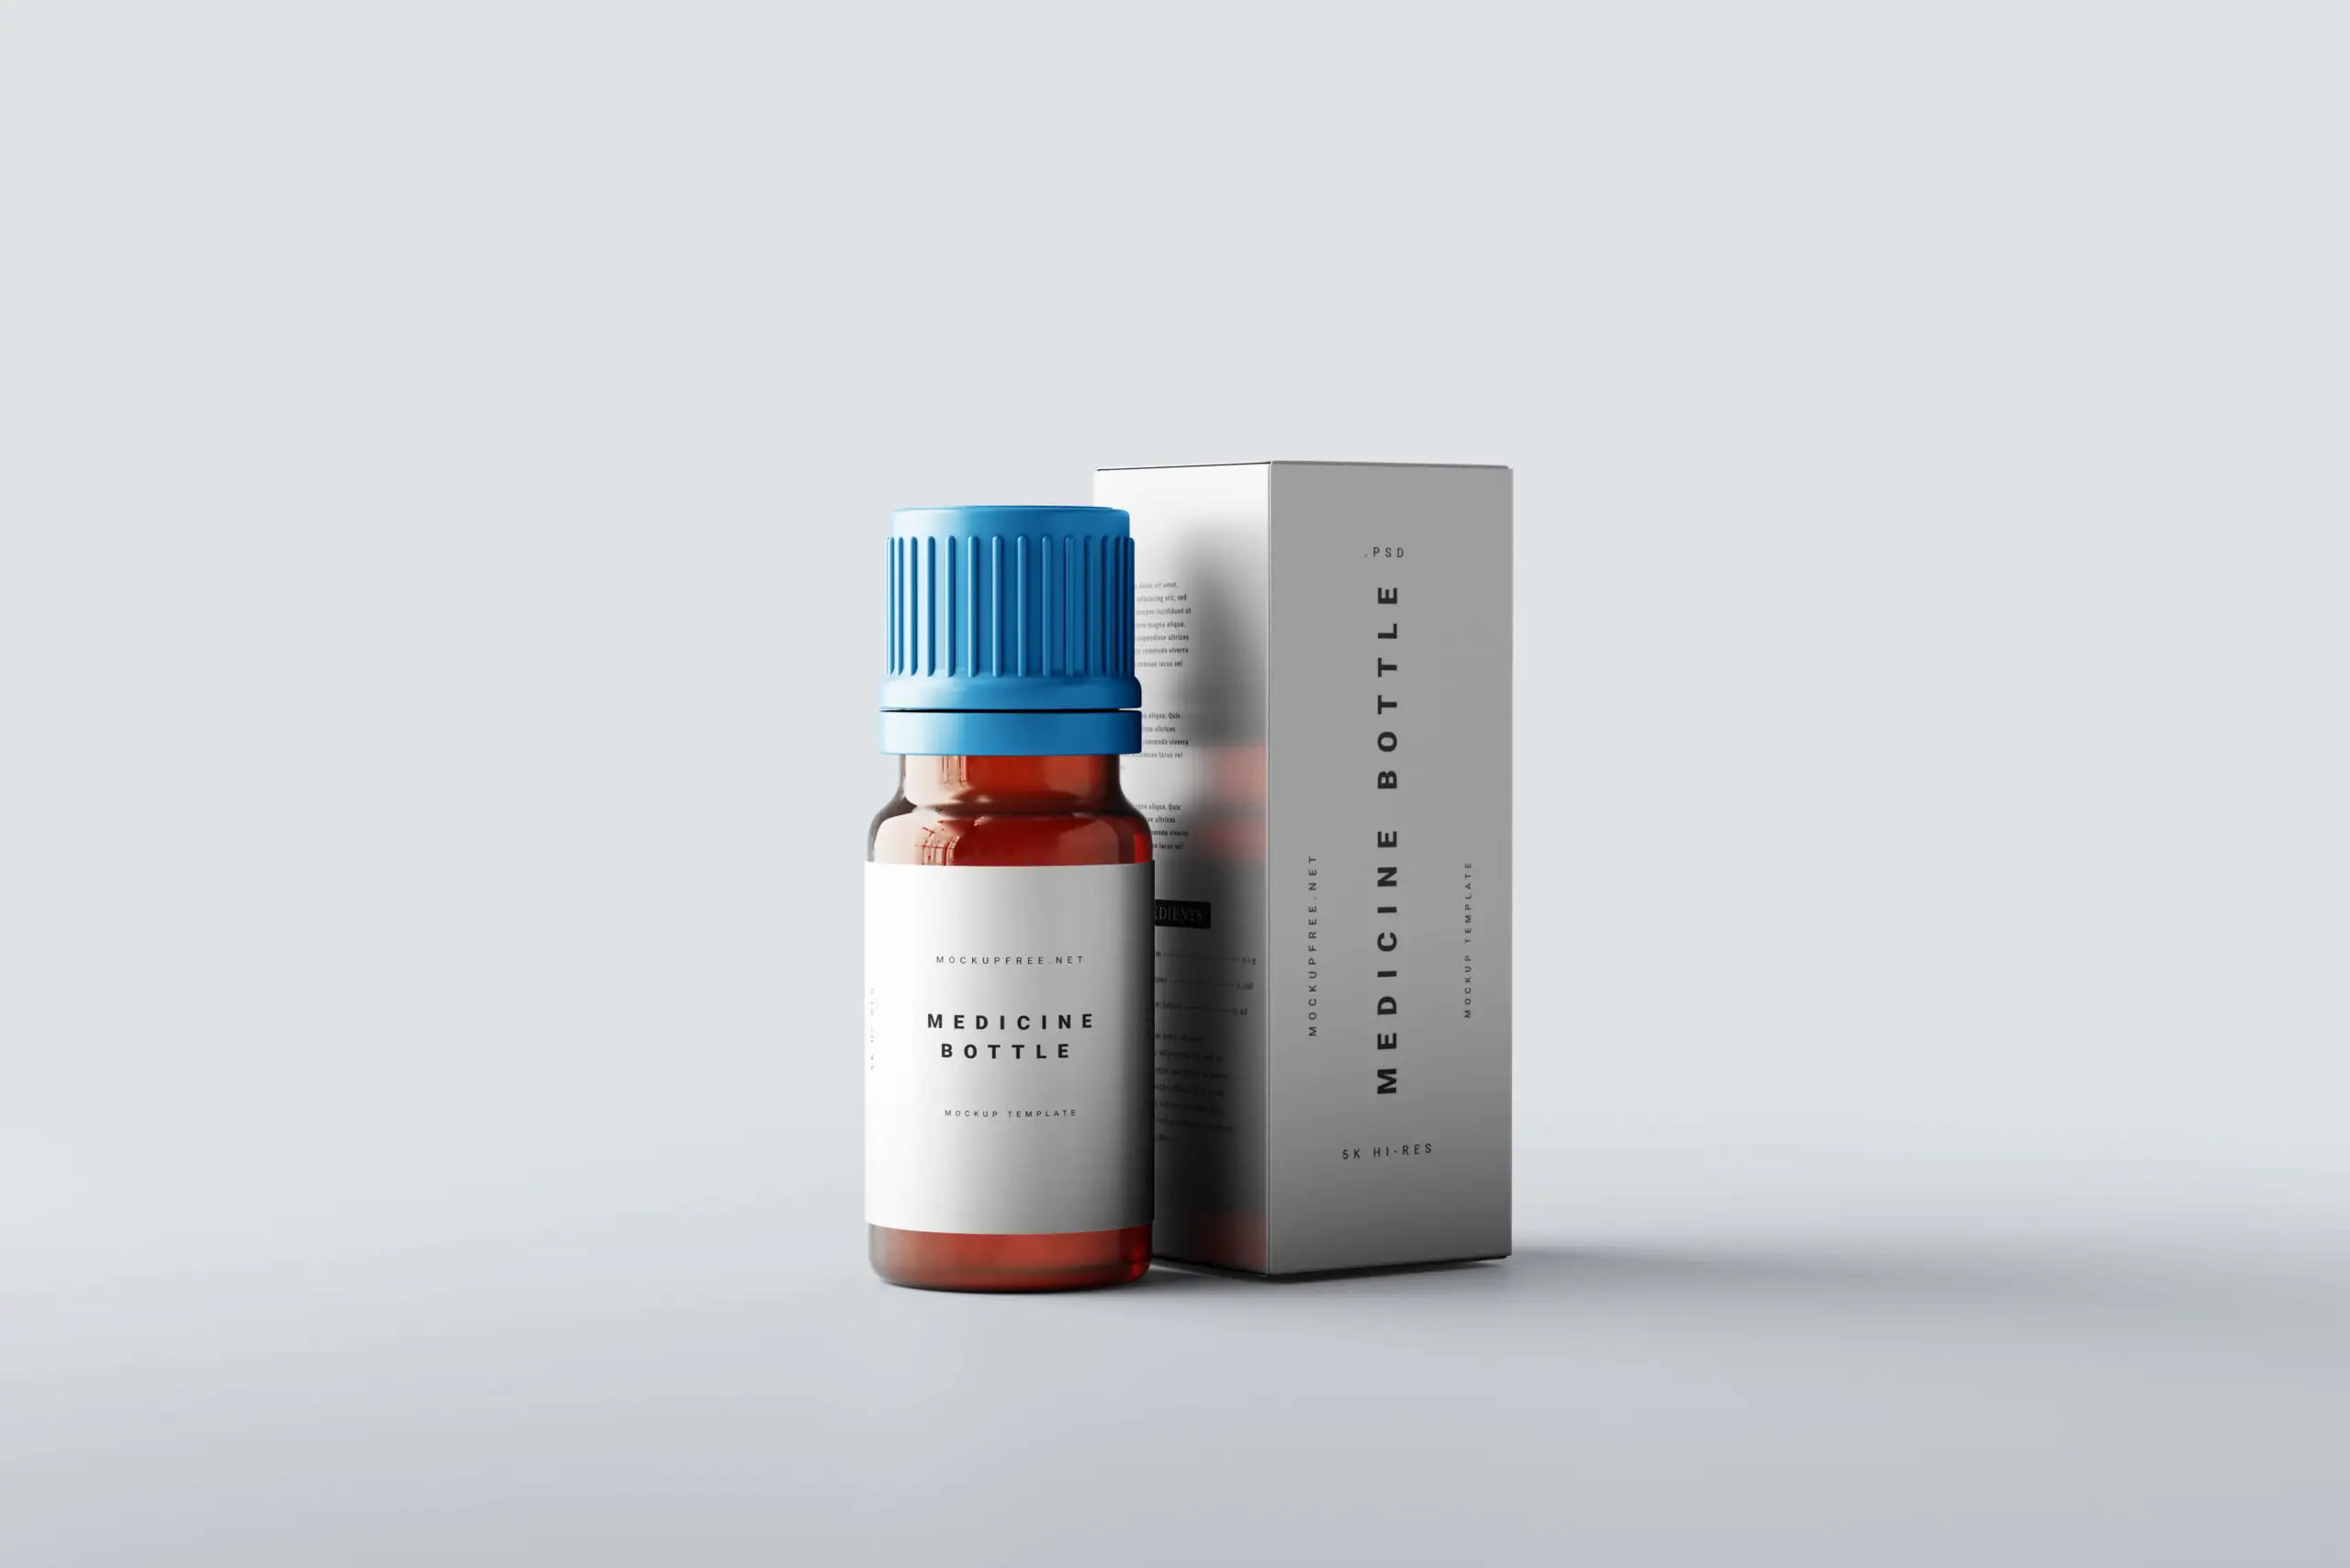 5 Medicine Bottle Mockups with Box in Distinct Sights FREE PSD